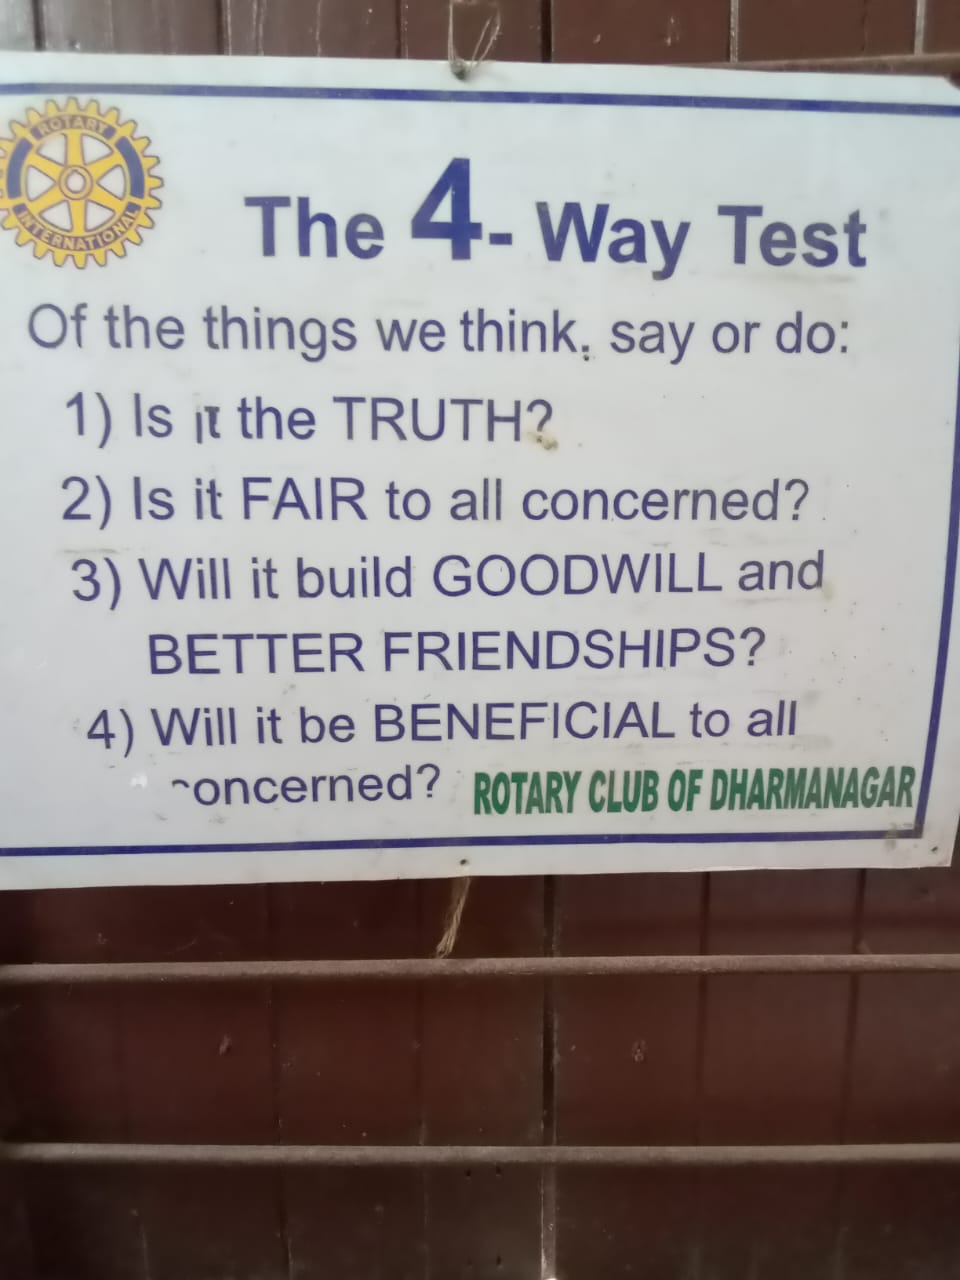 PROMOTION OF 4-WAY TEST